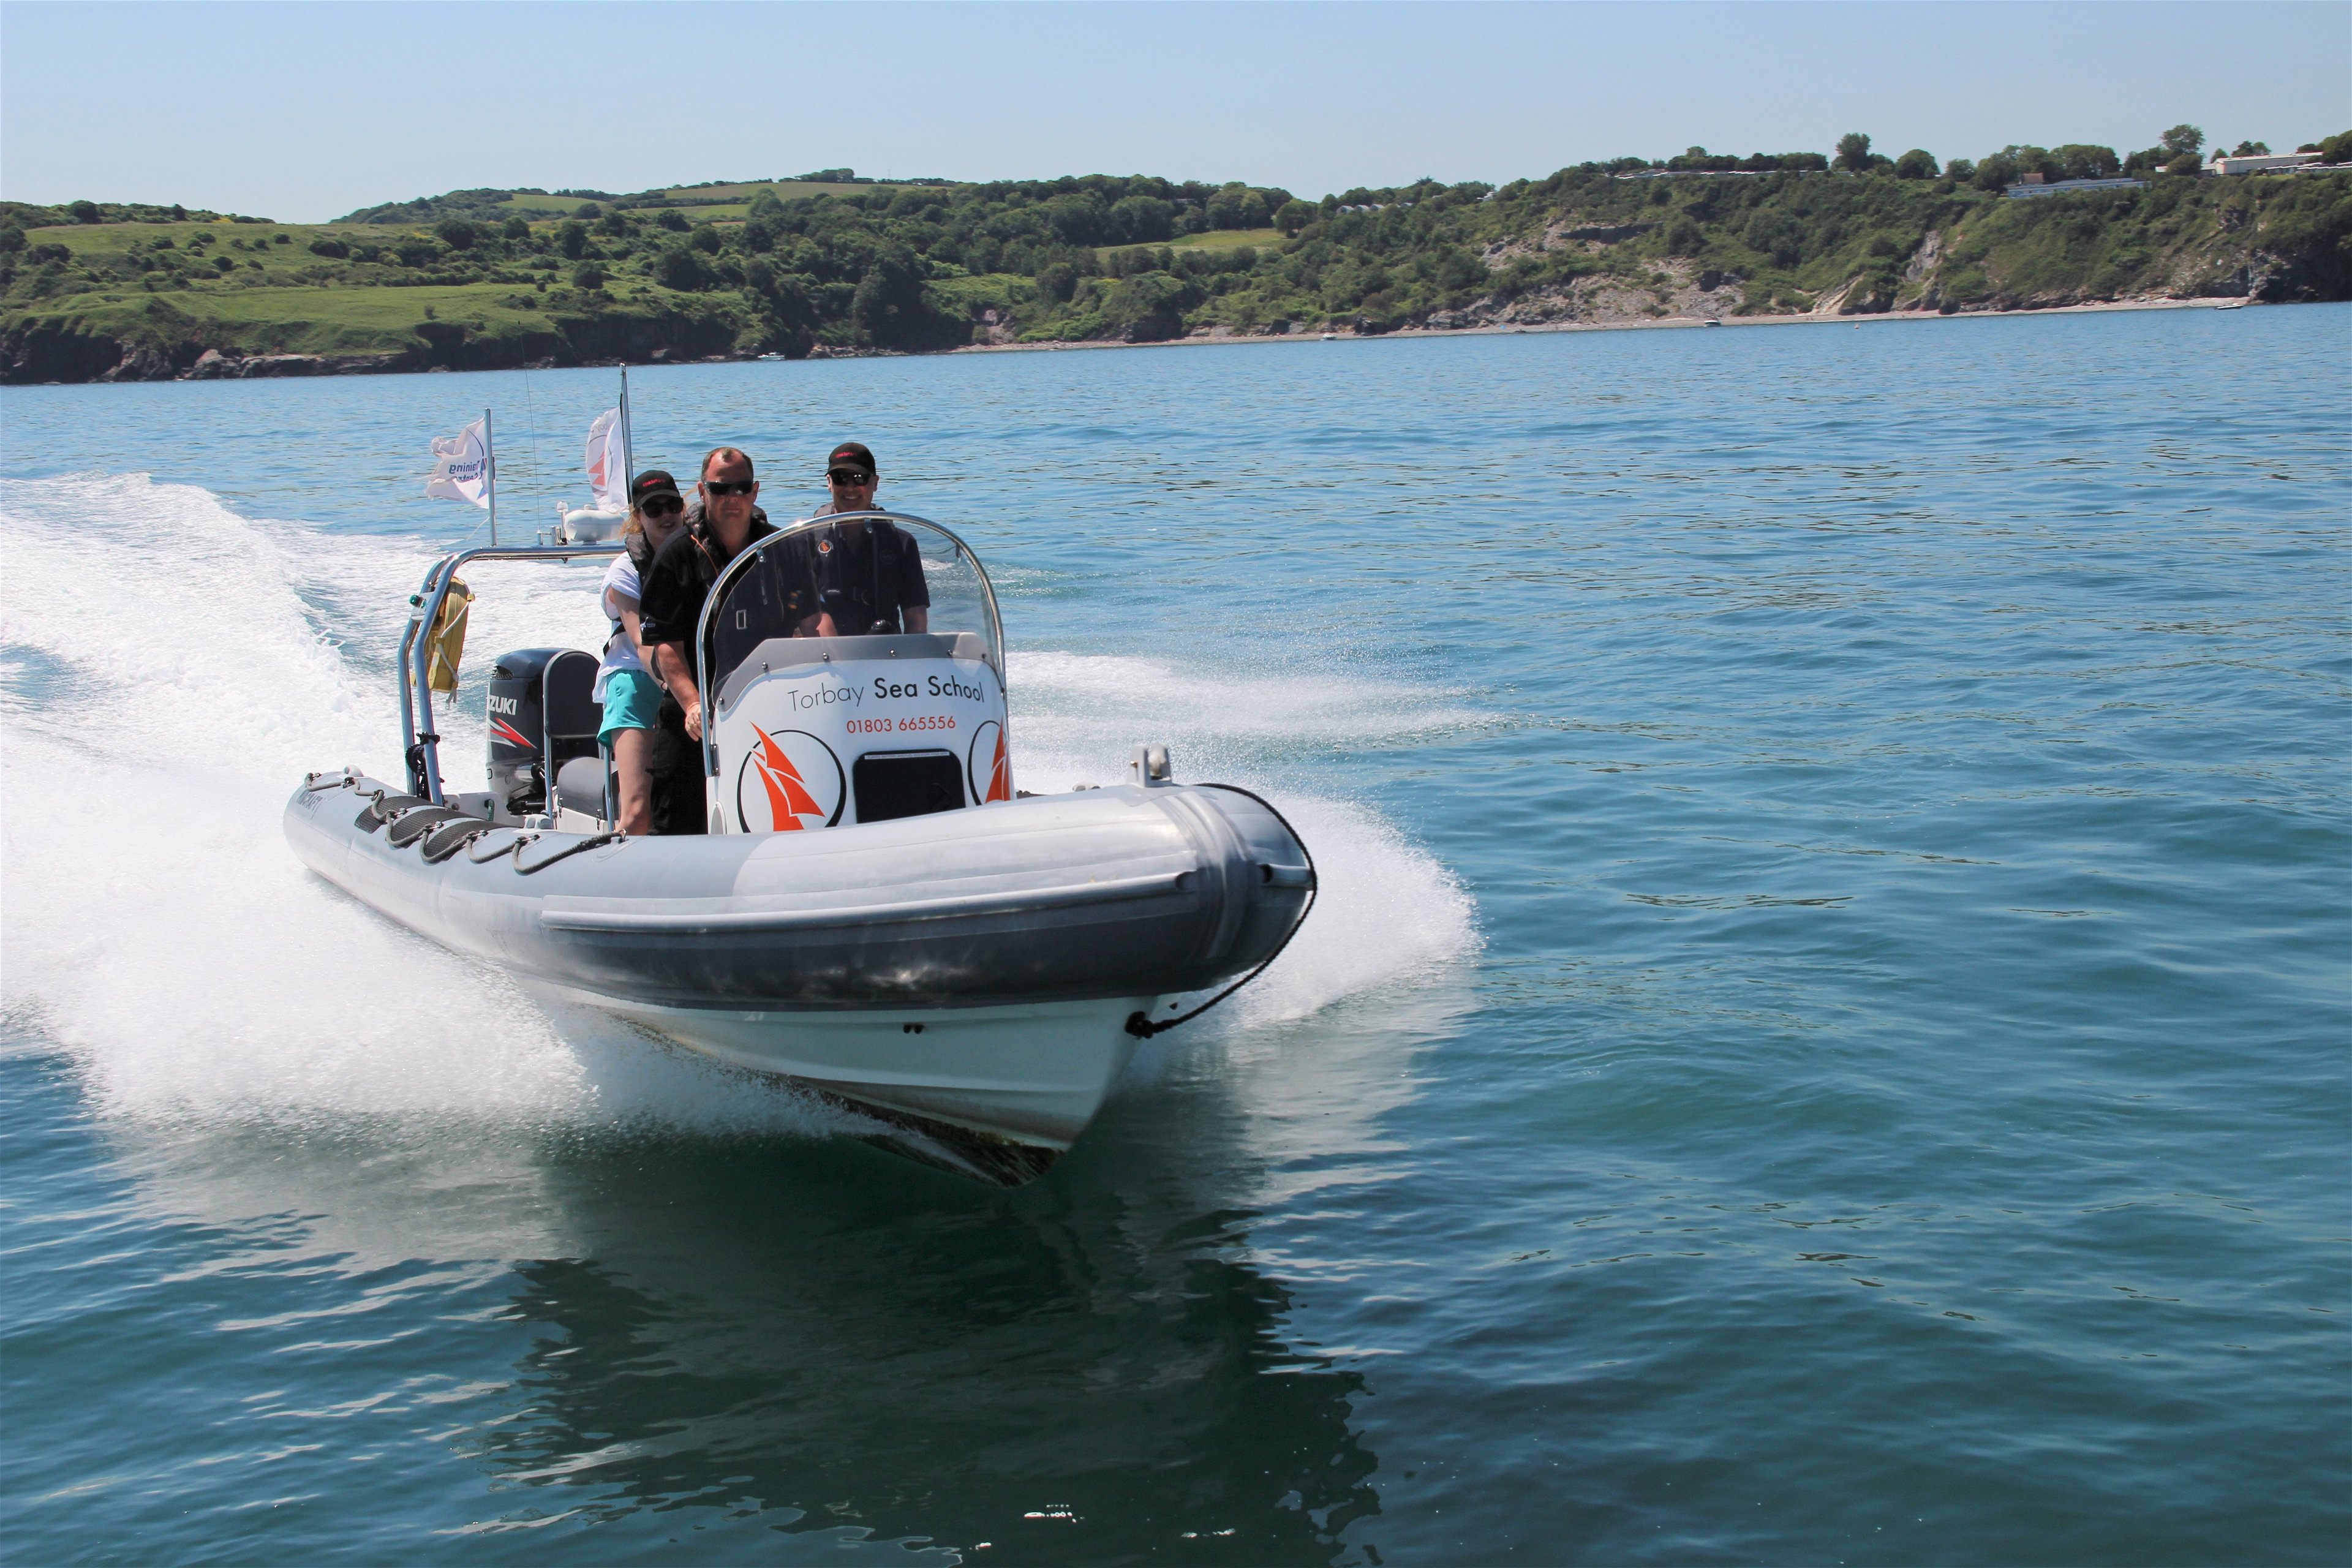 RYA Powerboat Instructor Course